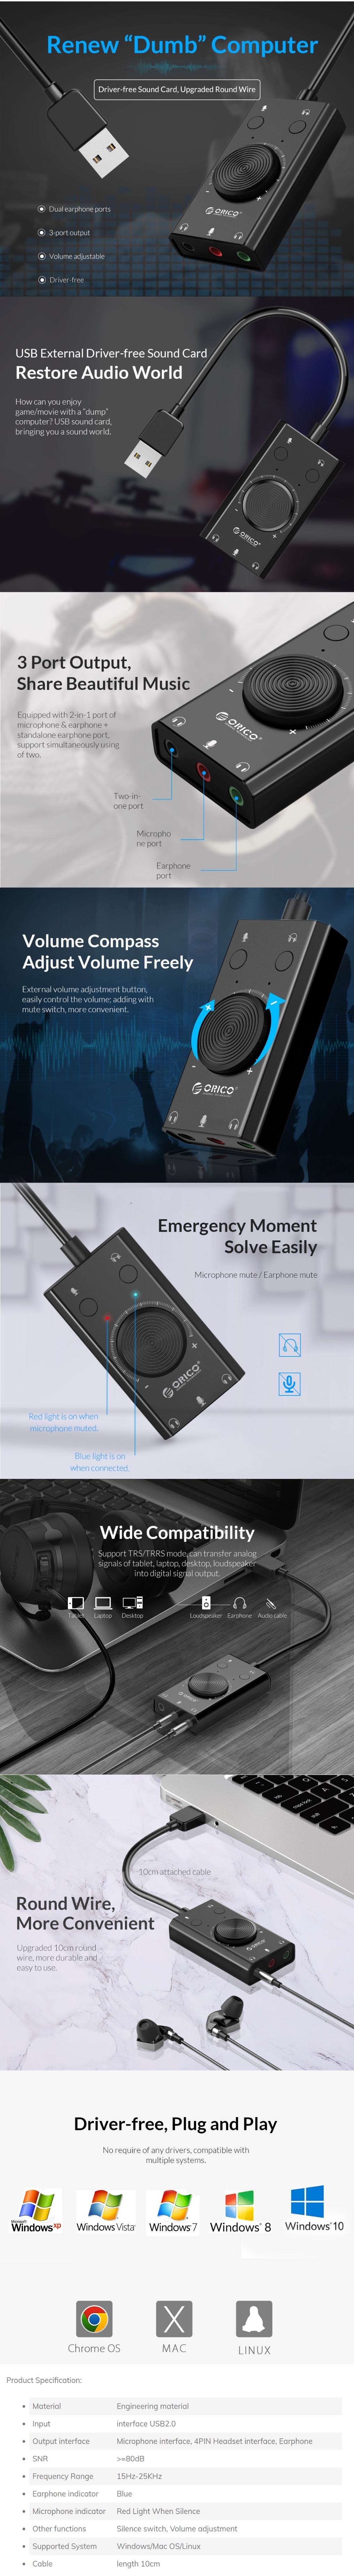 A large marketing image providing additional information about the product ORICO Multifunction USB External Sound Card - Additional alt info not provided